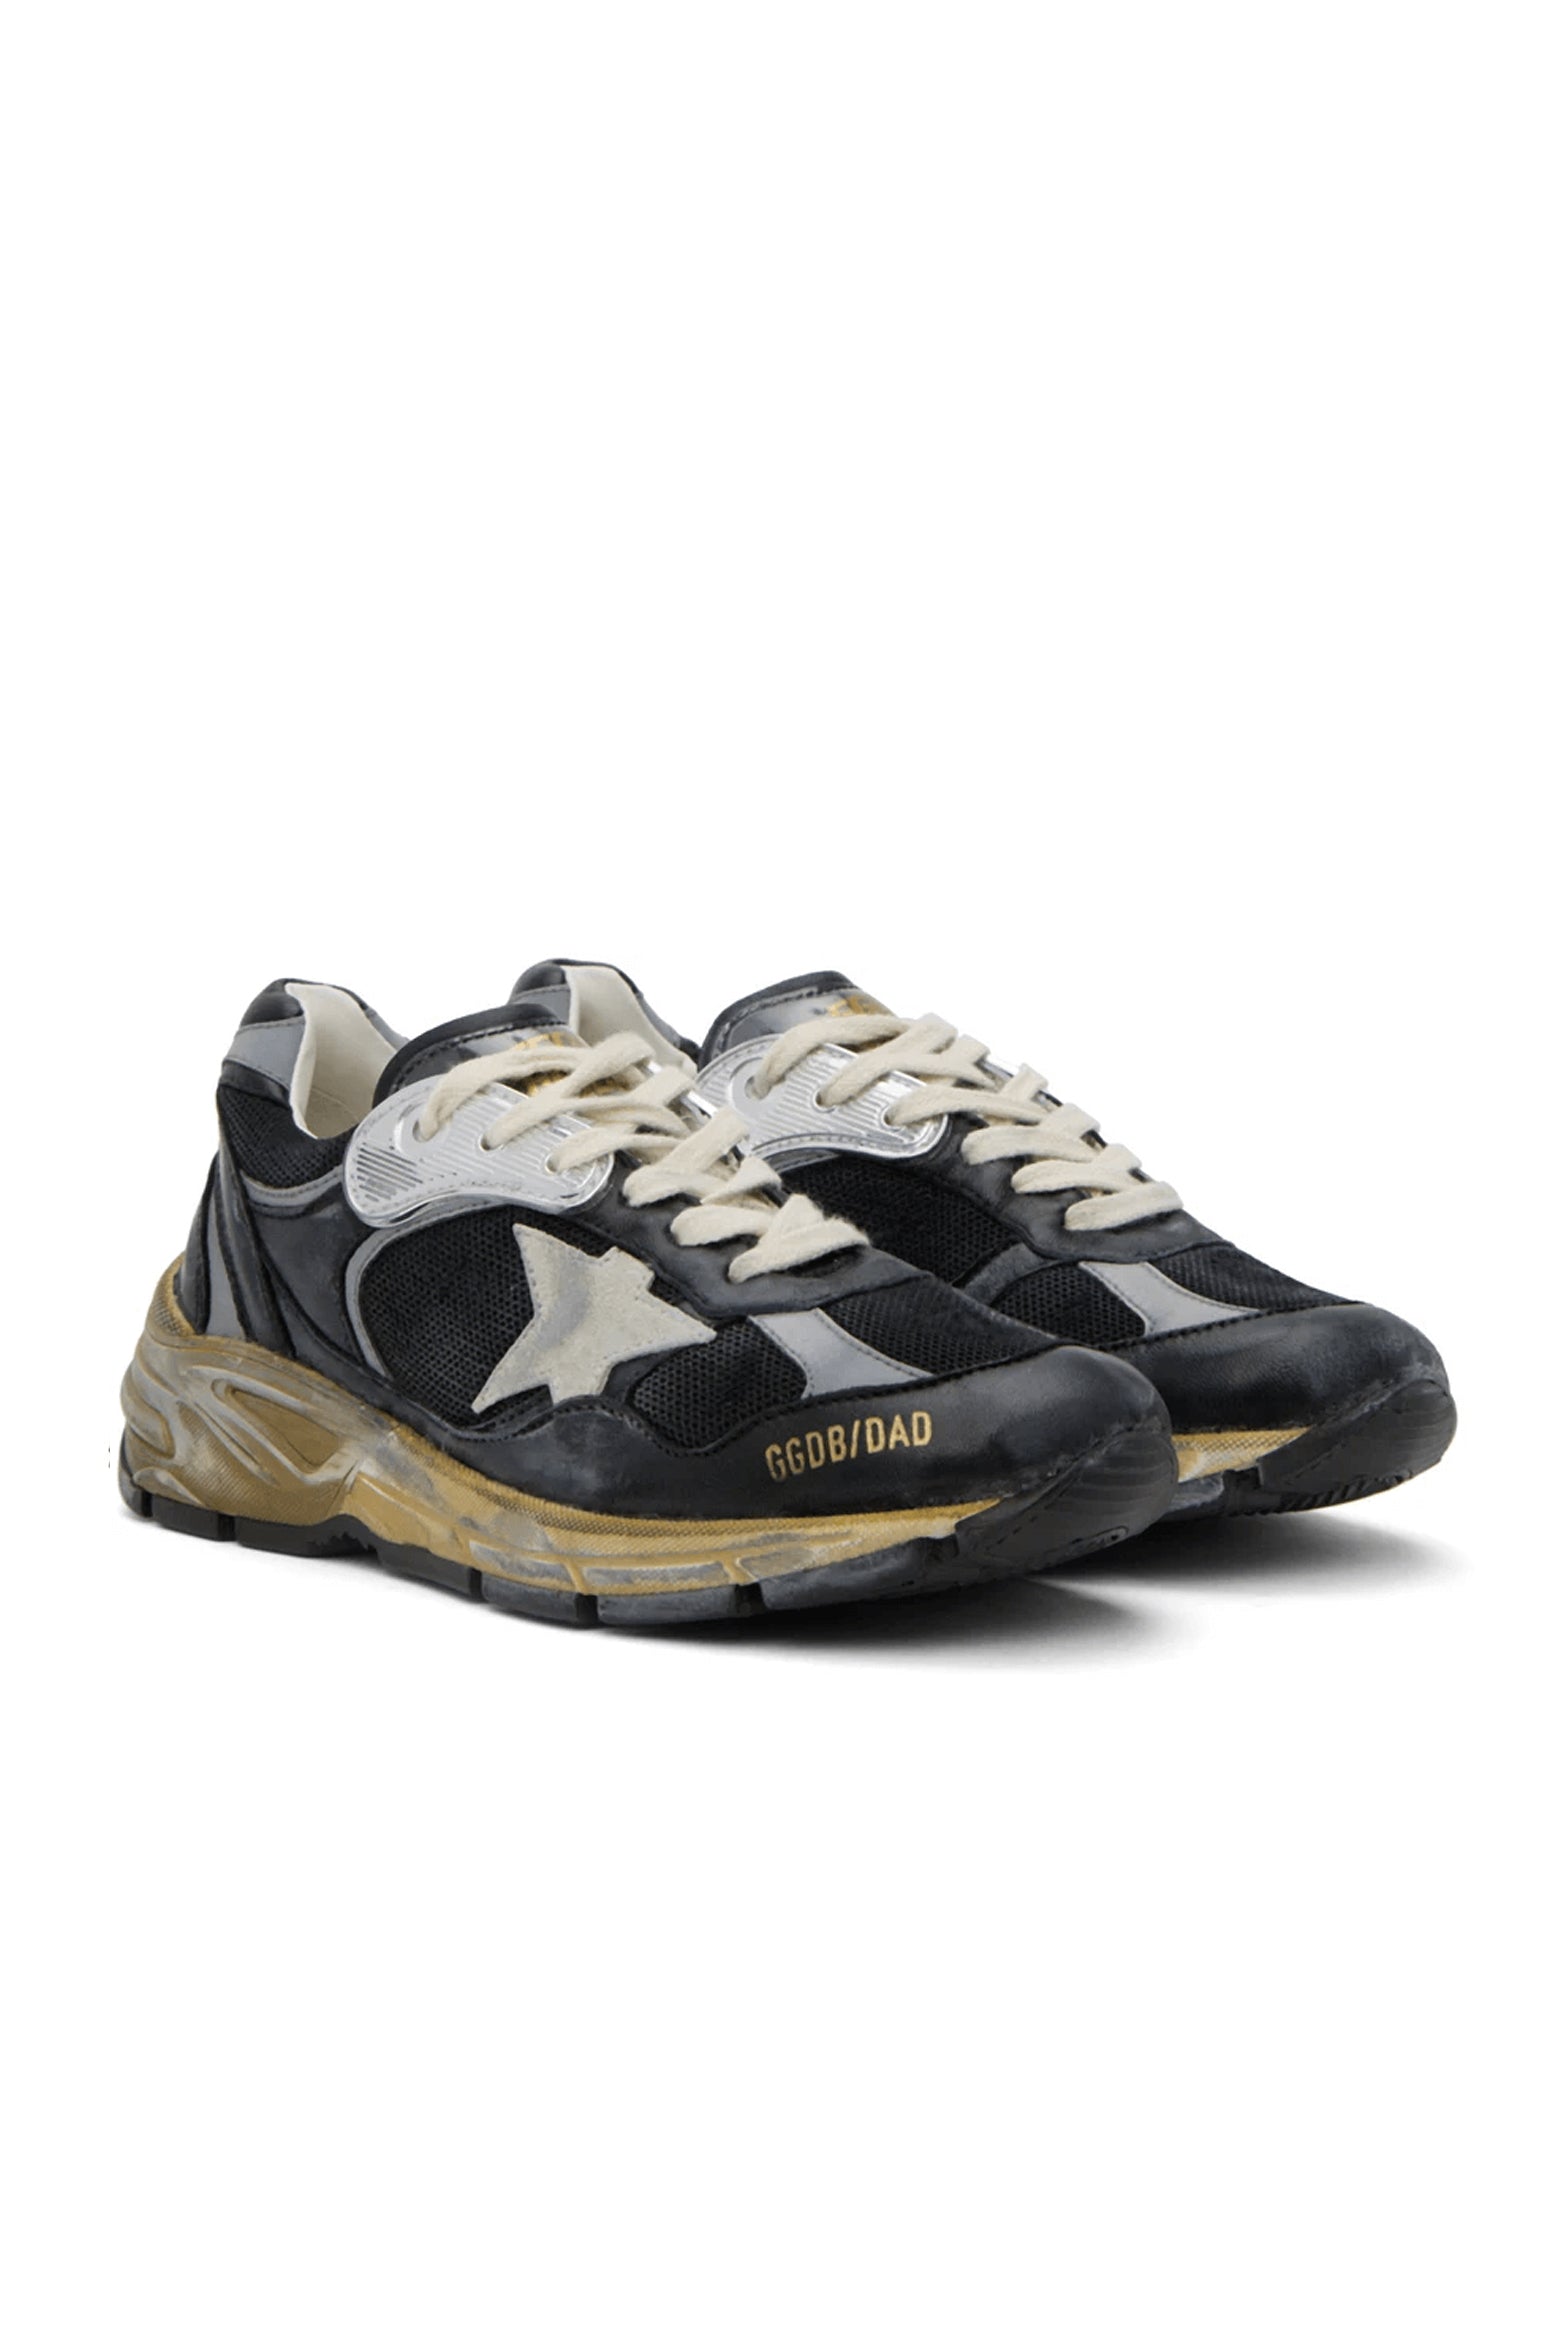 Golden Goose Running Dad Sneaker in Black/Silver/Ice available at TNT The New Trend Australia.